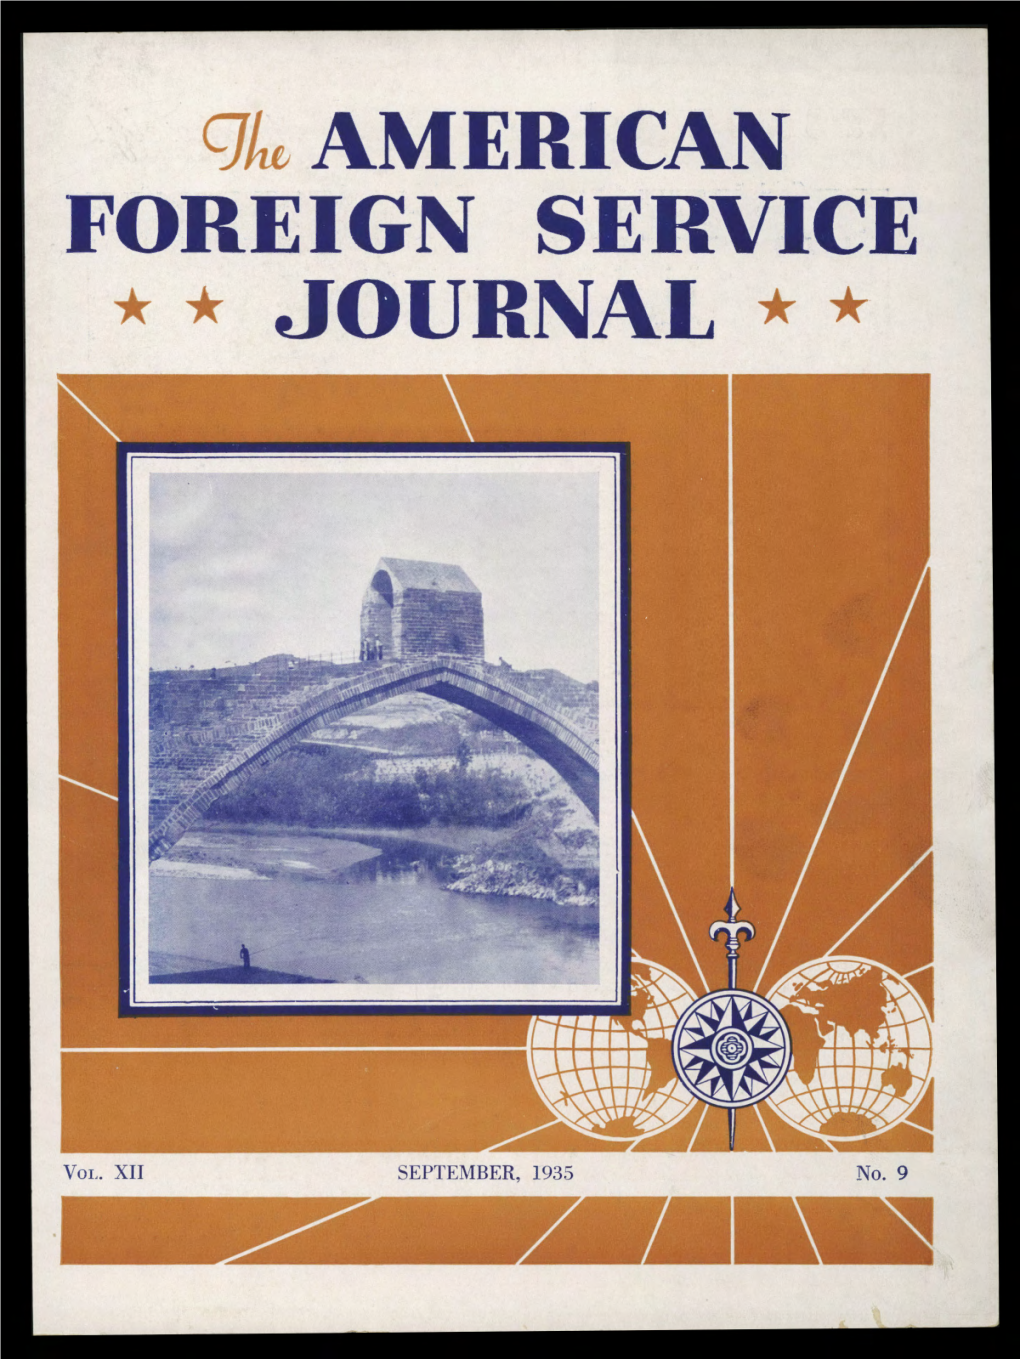 The Foreign Service Journal, September 1935